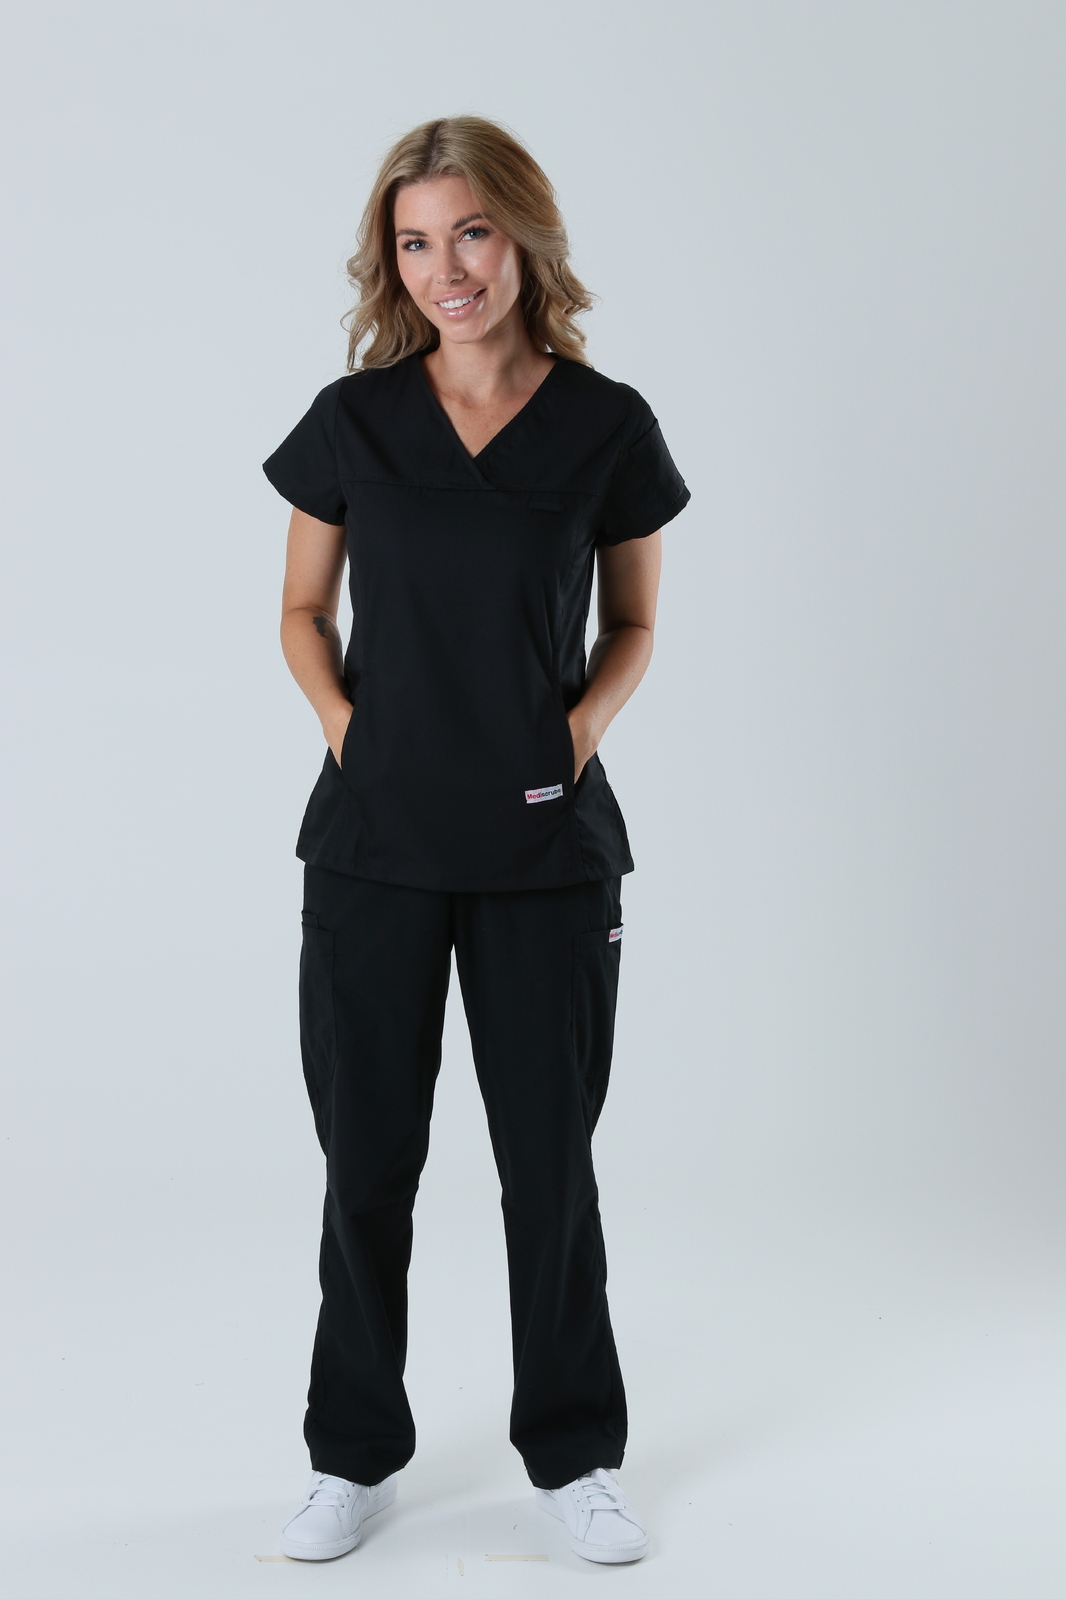 Hervey Bay Hospital - ICCCU RN (Women's Fit Solid Scrub Top and Cargo Pants in Black incl Logos)